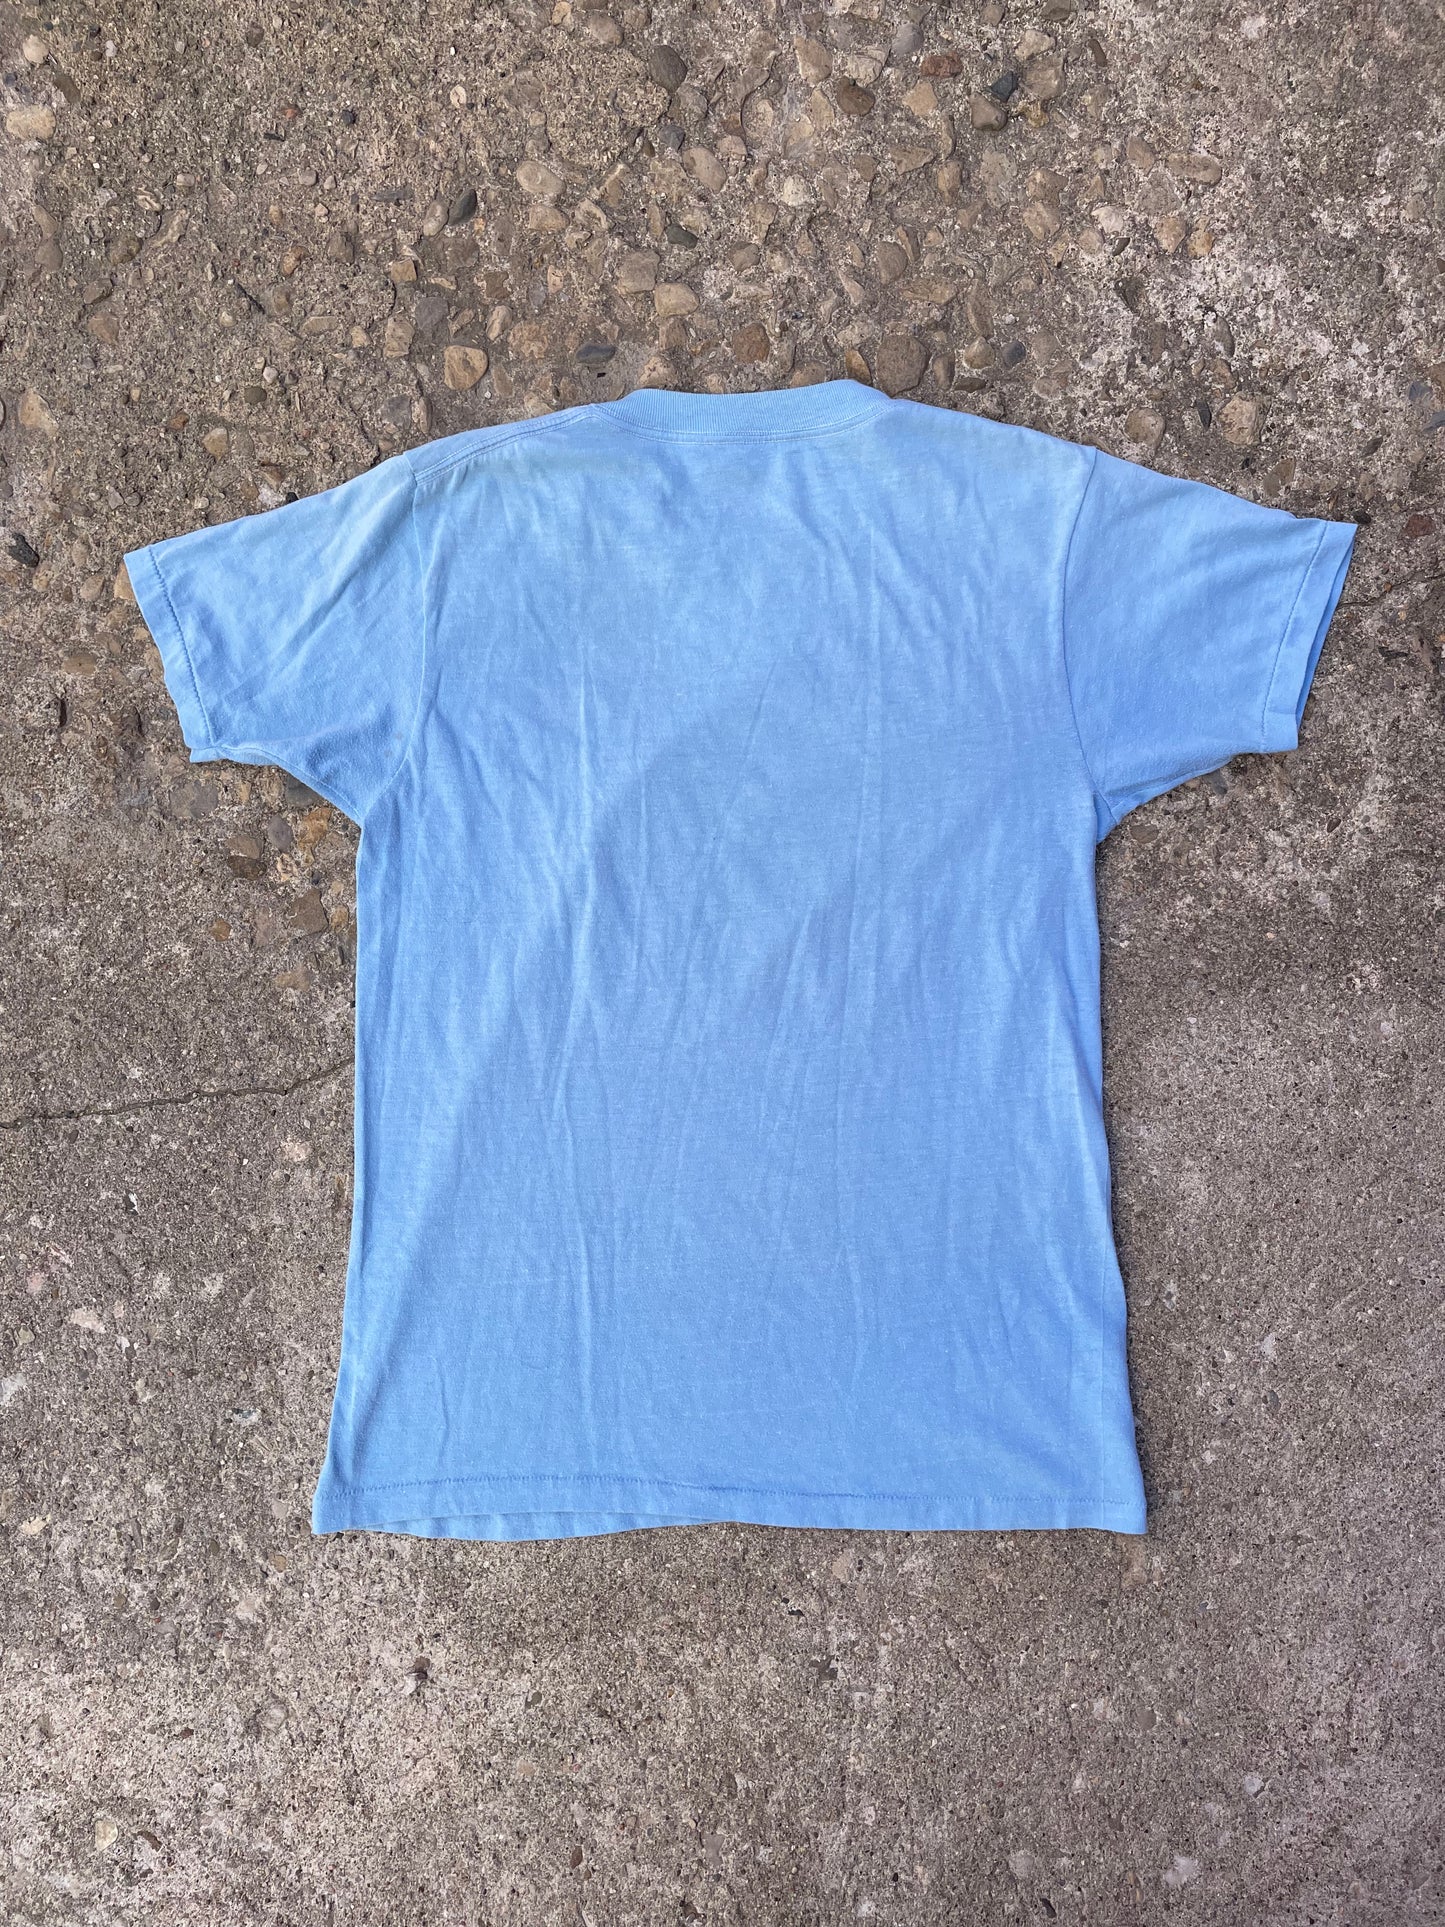 1970's True Blue Beer Iron On Graphic T-Shirt - M